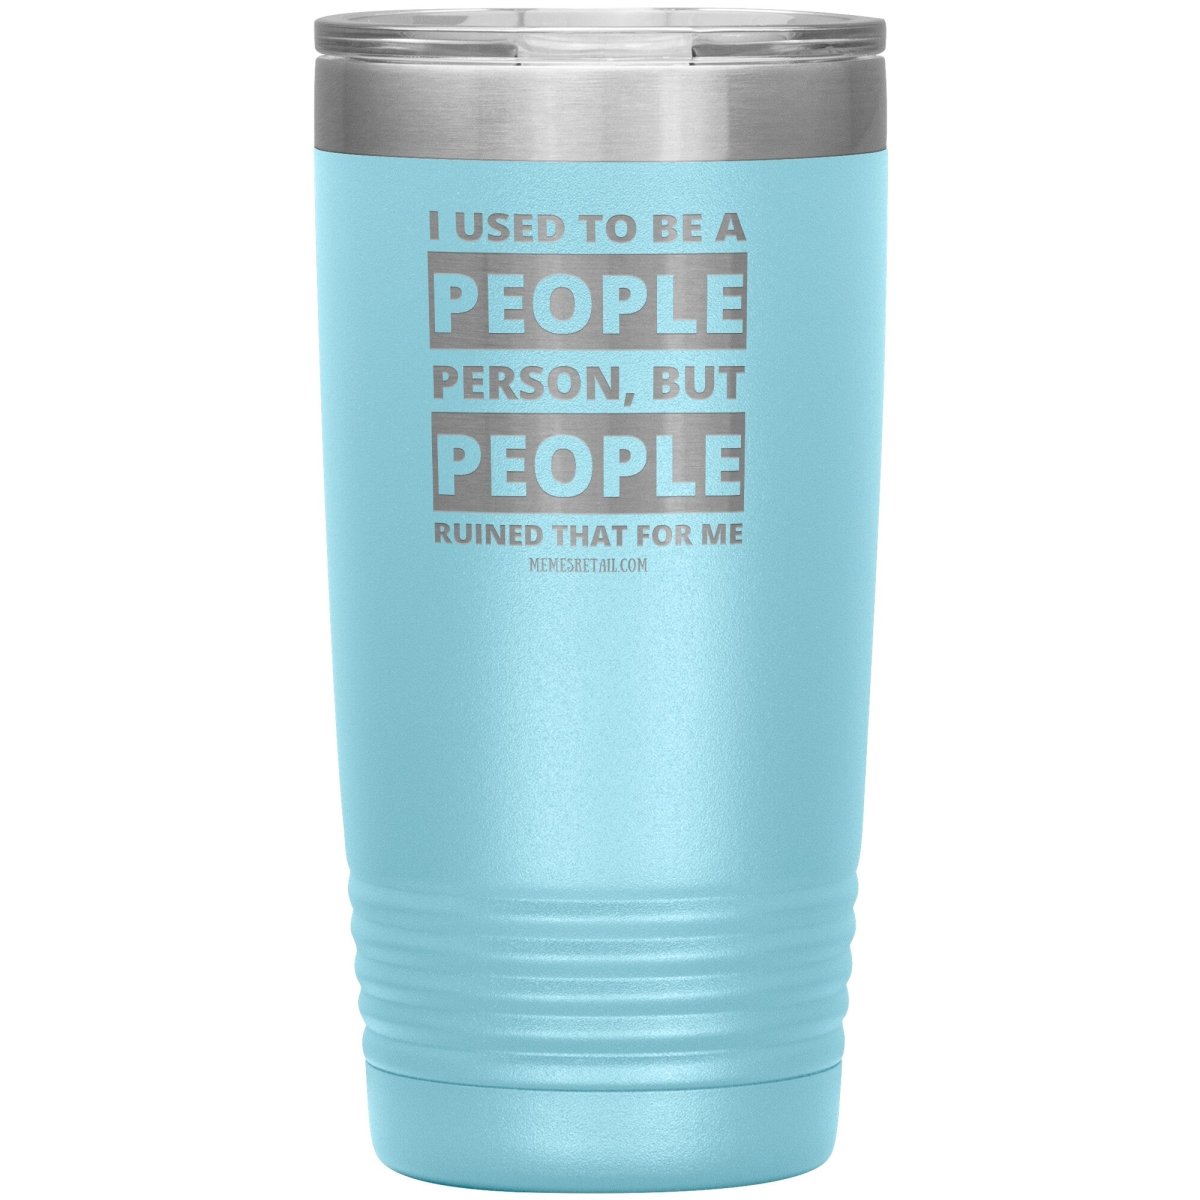 I Used To Be A People Person, But People Ruined That For Me Tumblers, 20oz Insulated Tumbler / Light Blue - MemesRetail.com